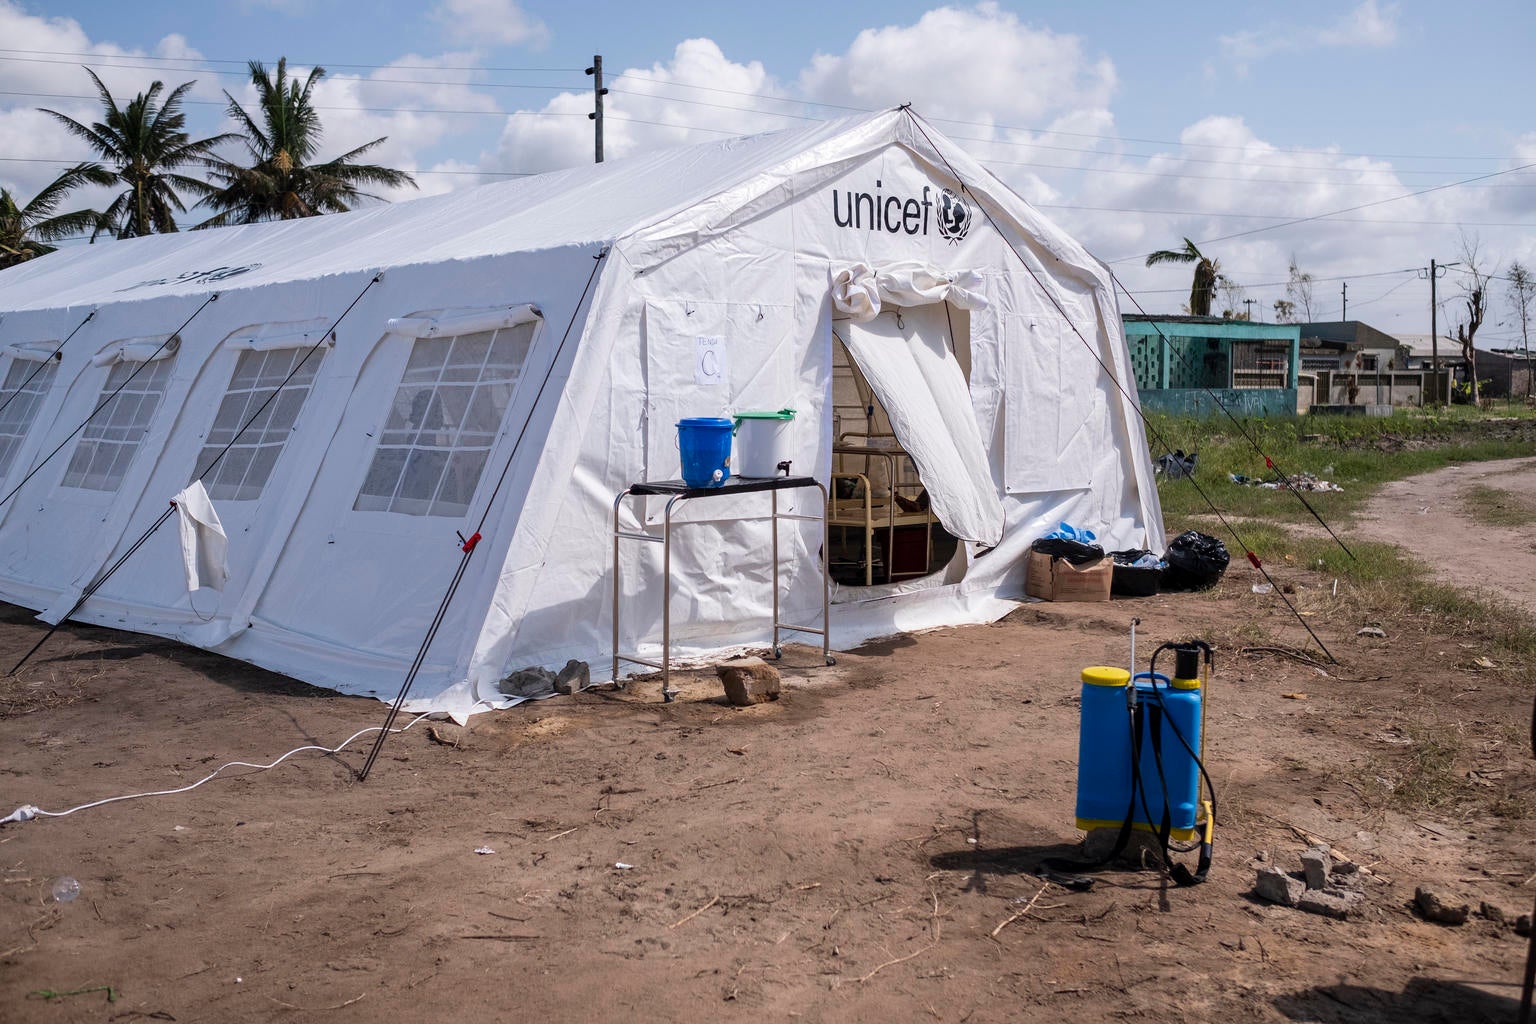 An aid tent with the UNICEF logo on it.